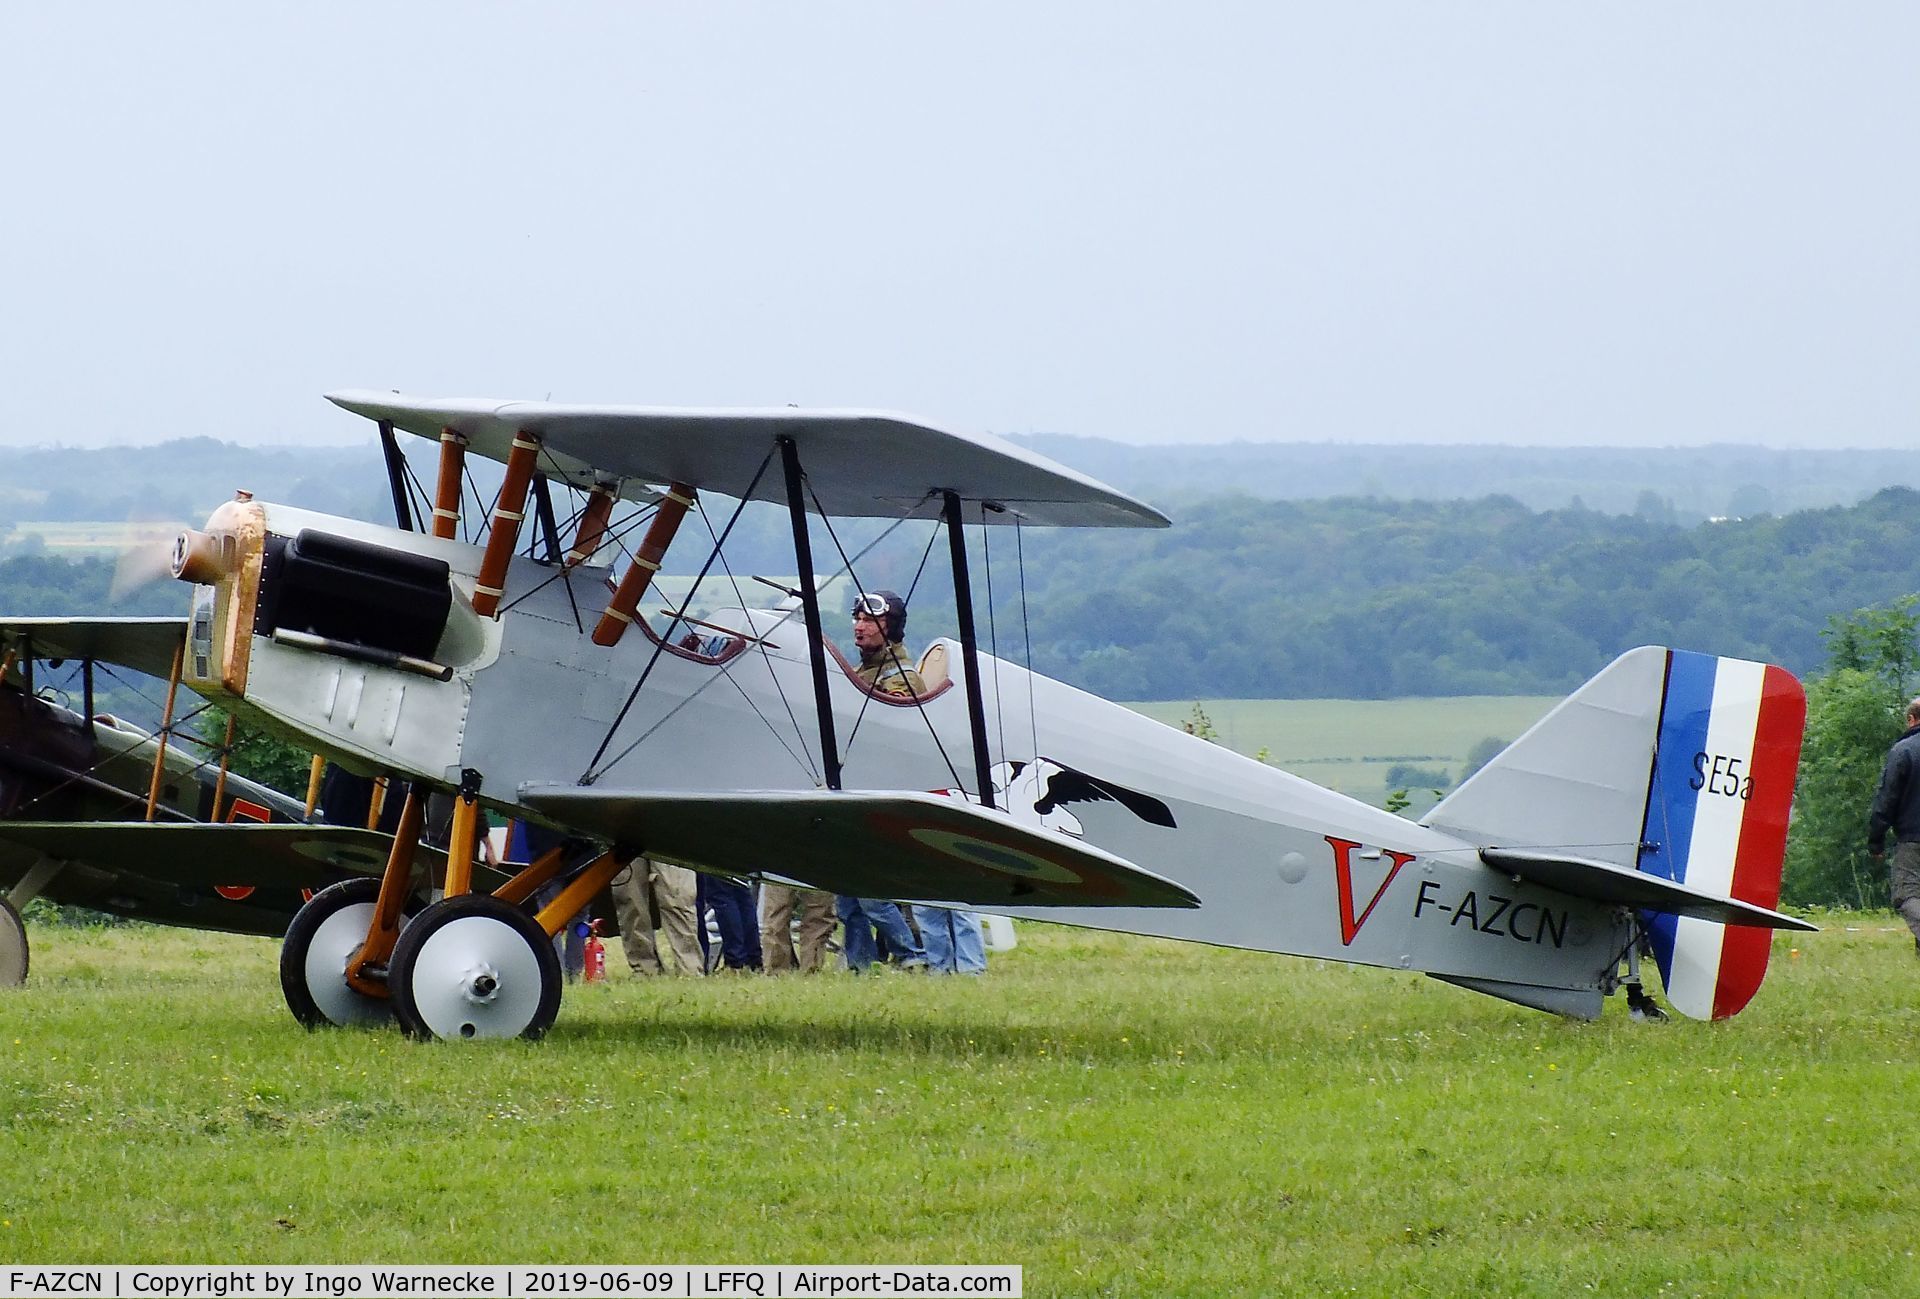 F-AZCN, Royal Aircraft Factory SE-5A Replica C/N 02, Amicale Jean Salis R.A.F. S.E.5 two-seater look-alike (converted from a Stampe SV-4) at the Meeting Aerien 2019, La-Ferte-Alais